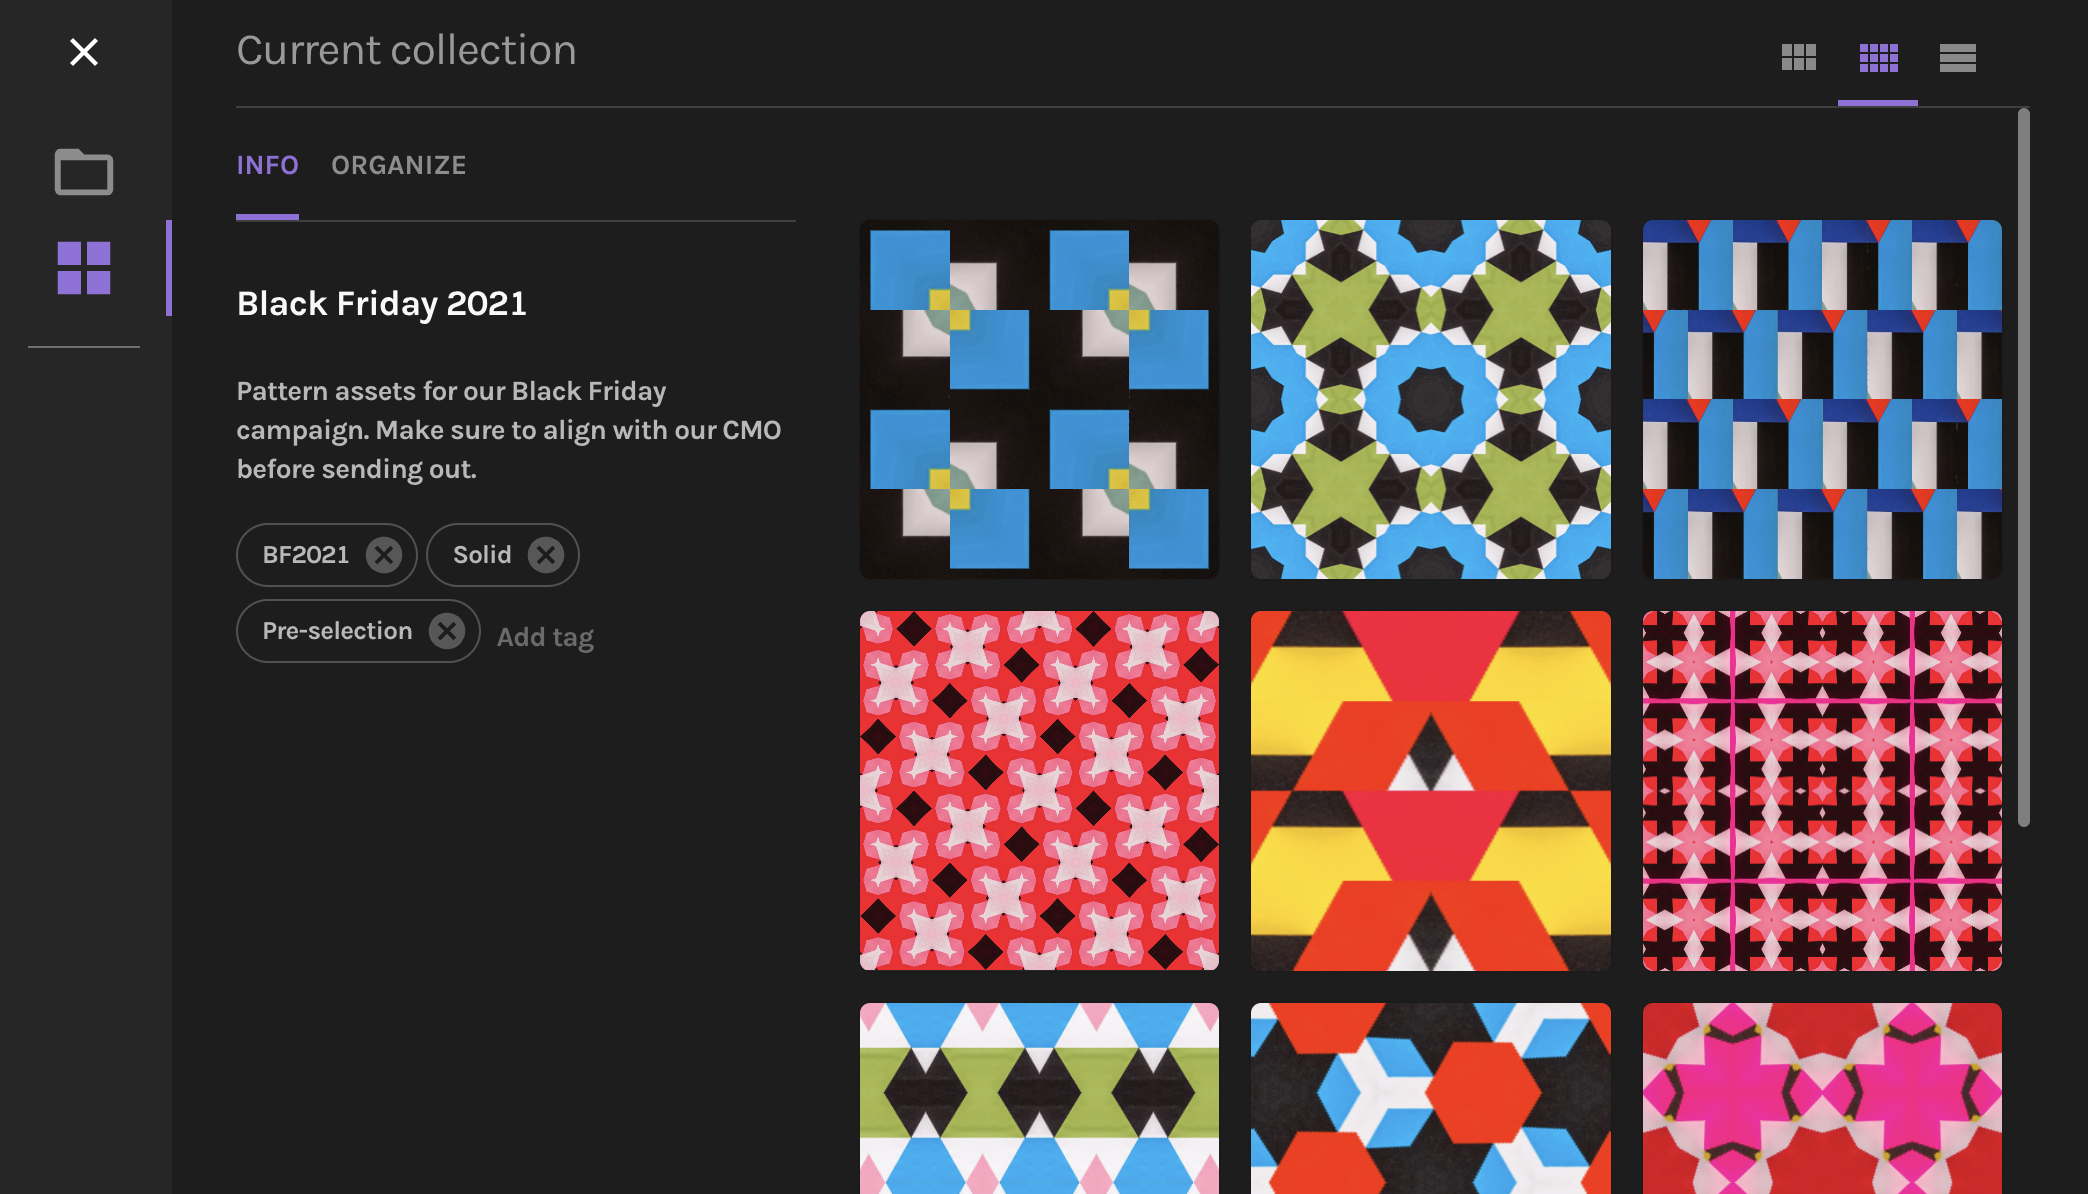 New: A better way to manage your pattern collections